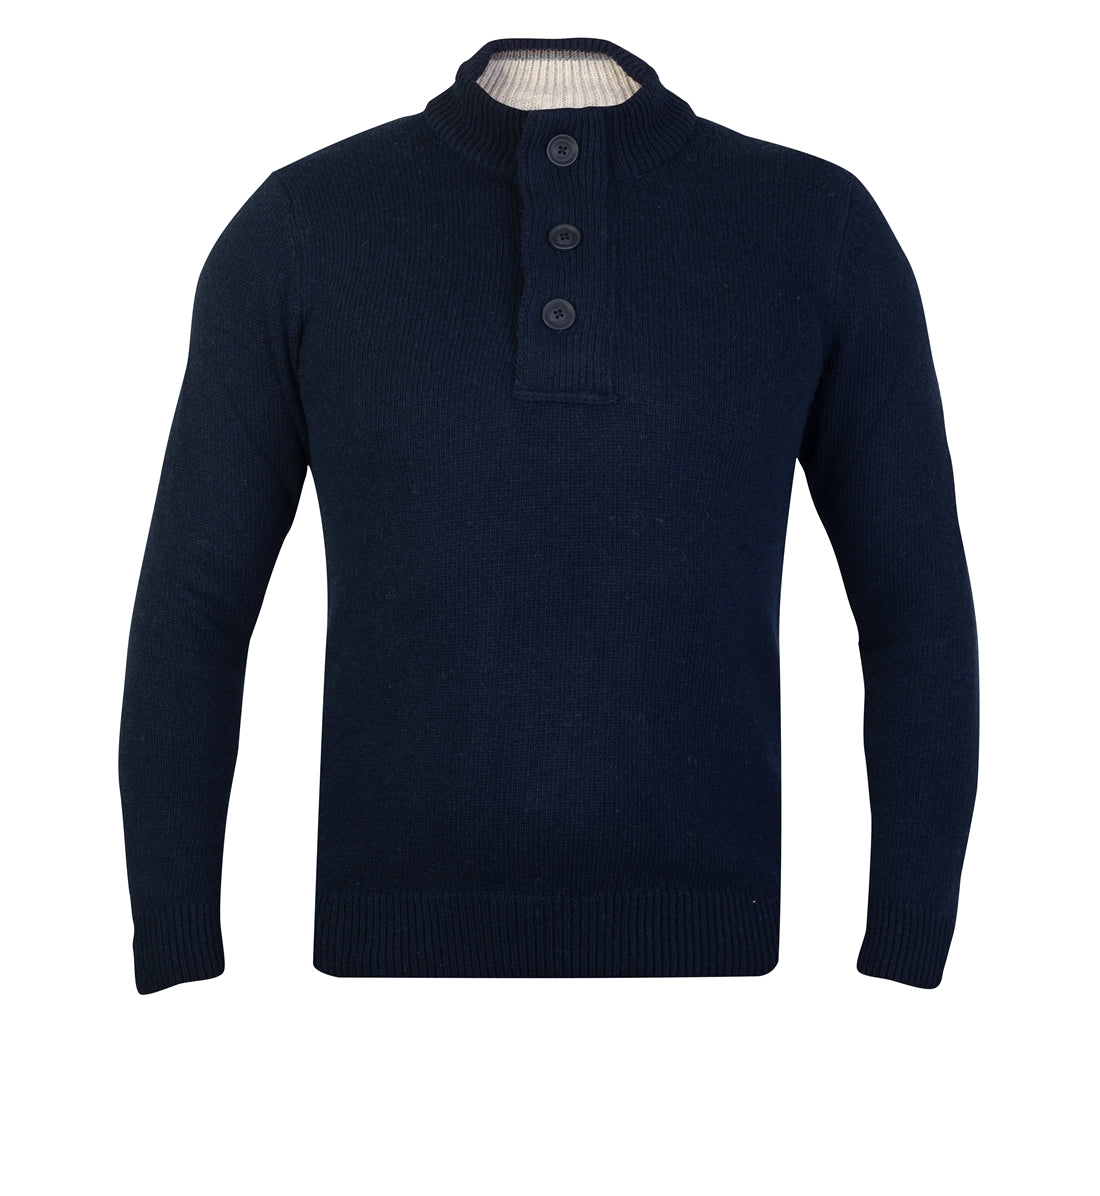 Guide London - Wool/Cashmere Knit - Navy